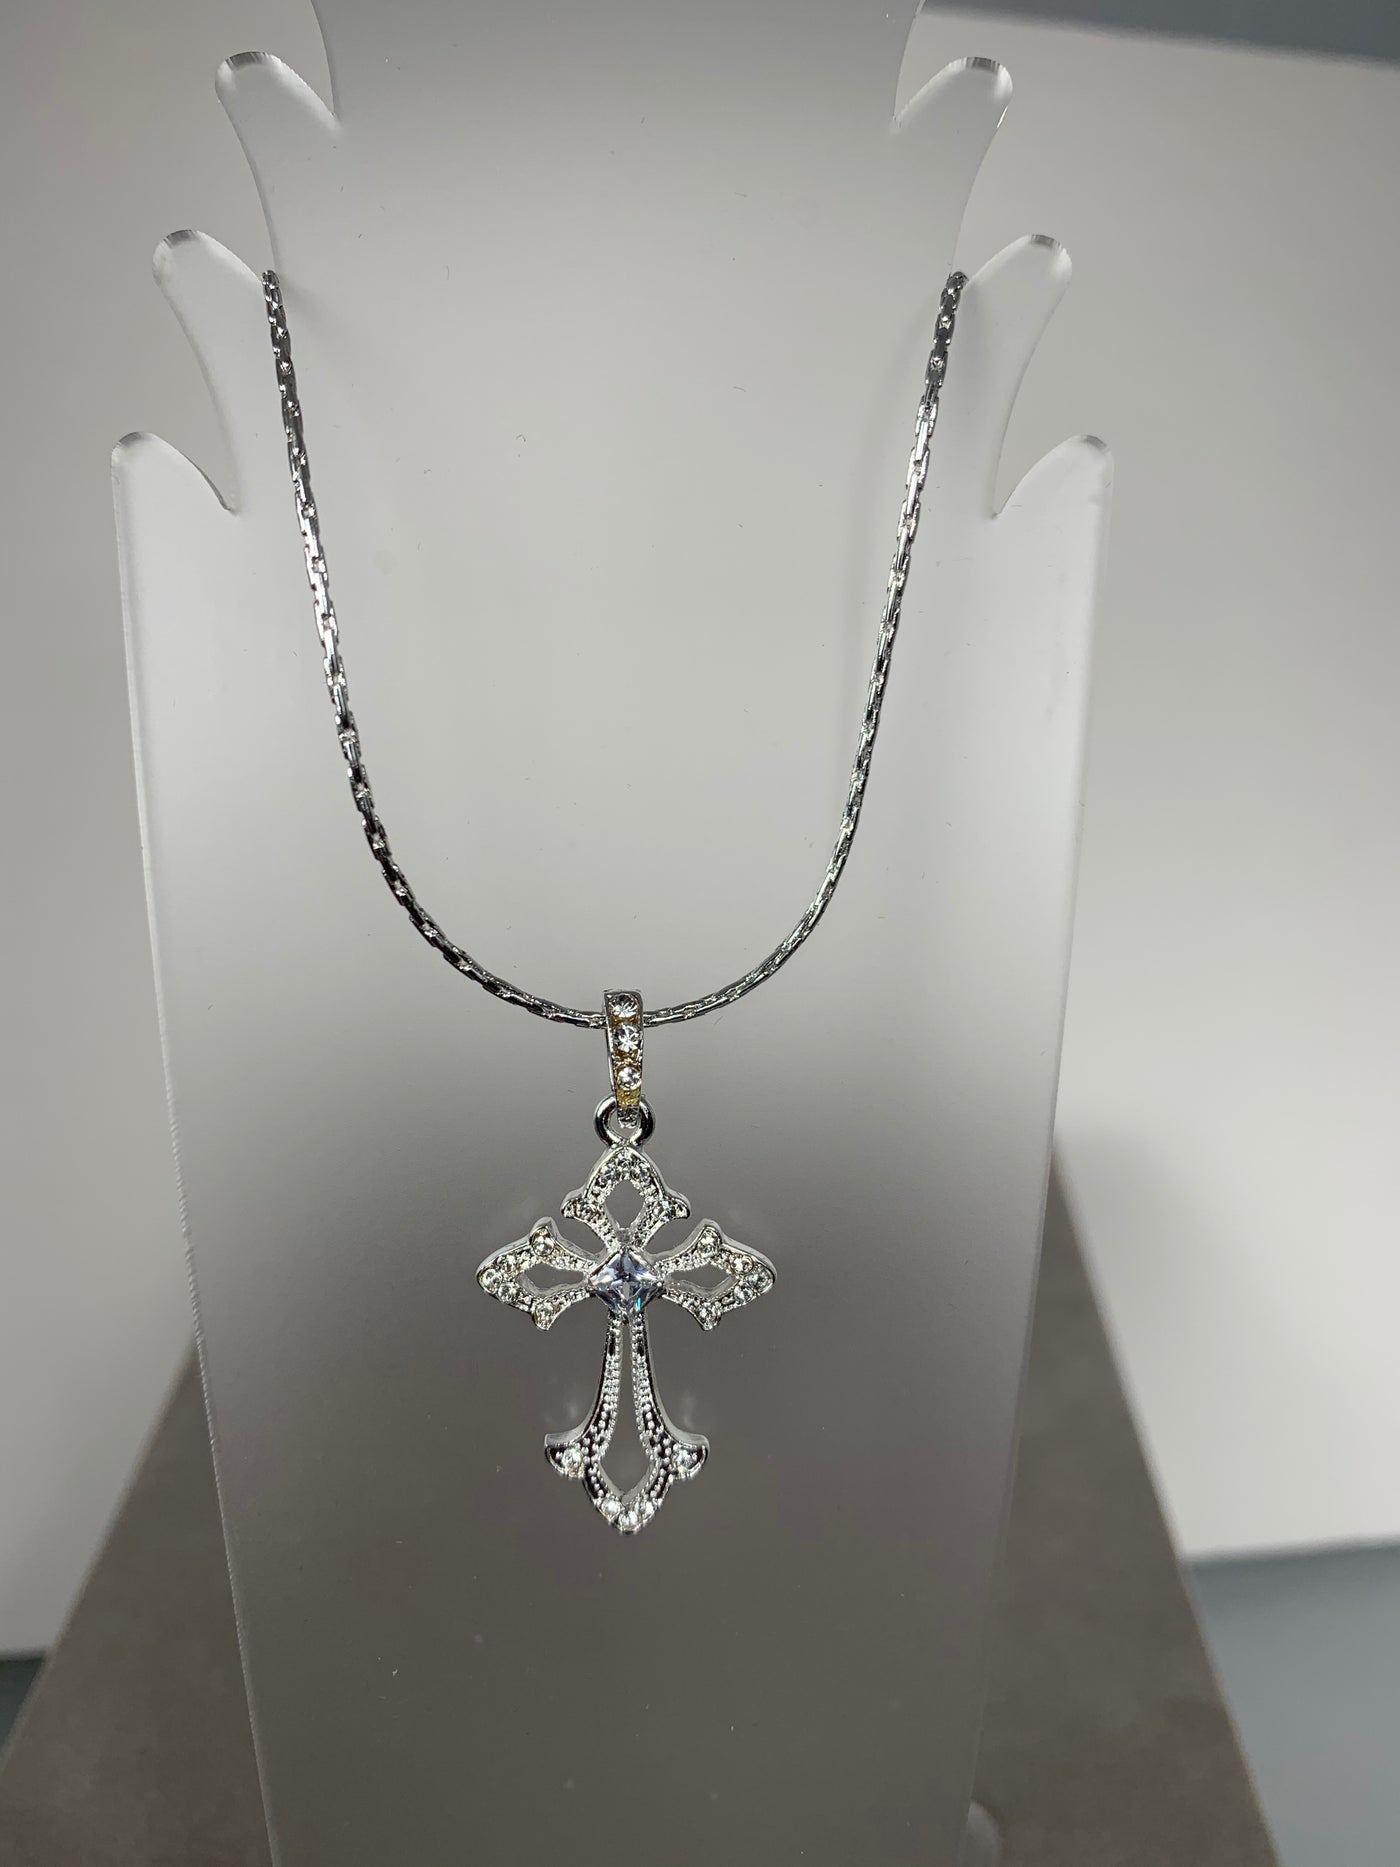 Silver Tone Ornate Crystal Cross Pendant Necklace